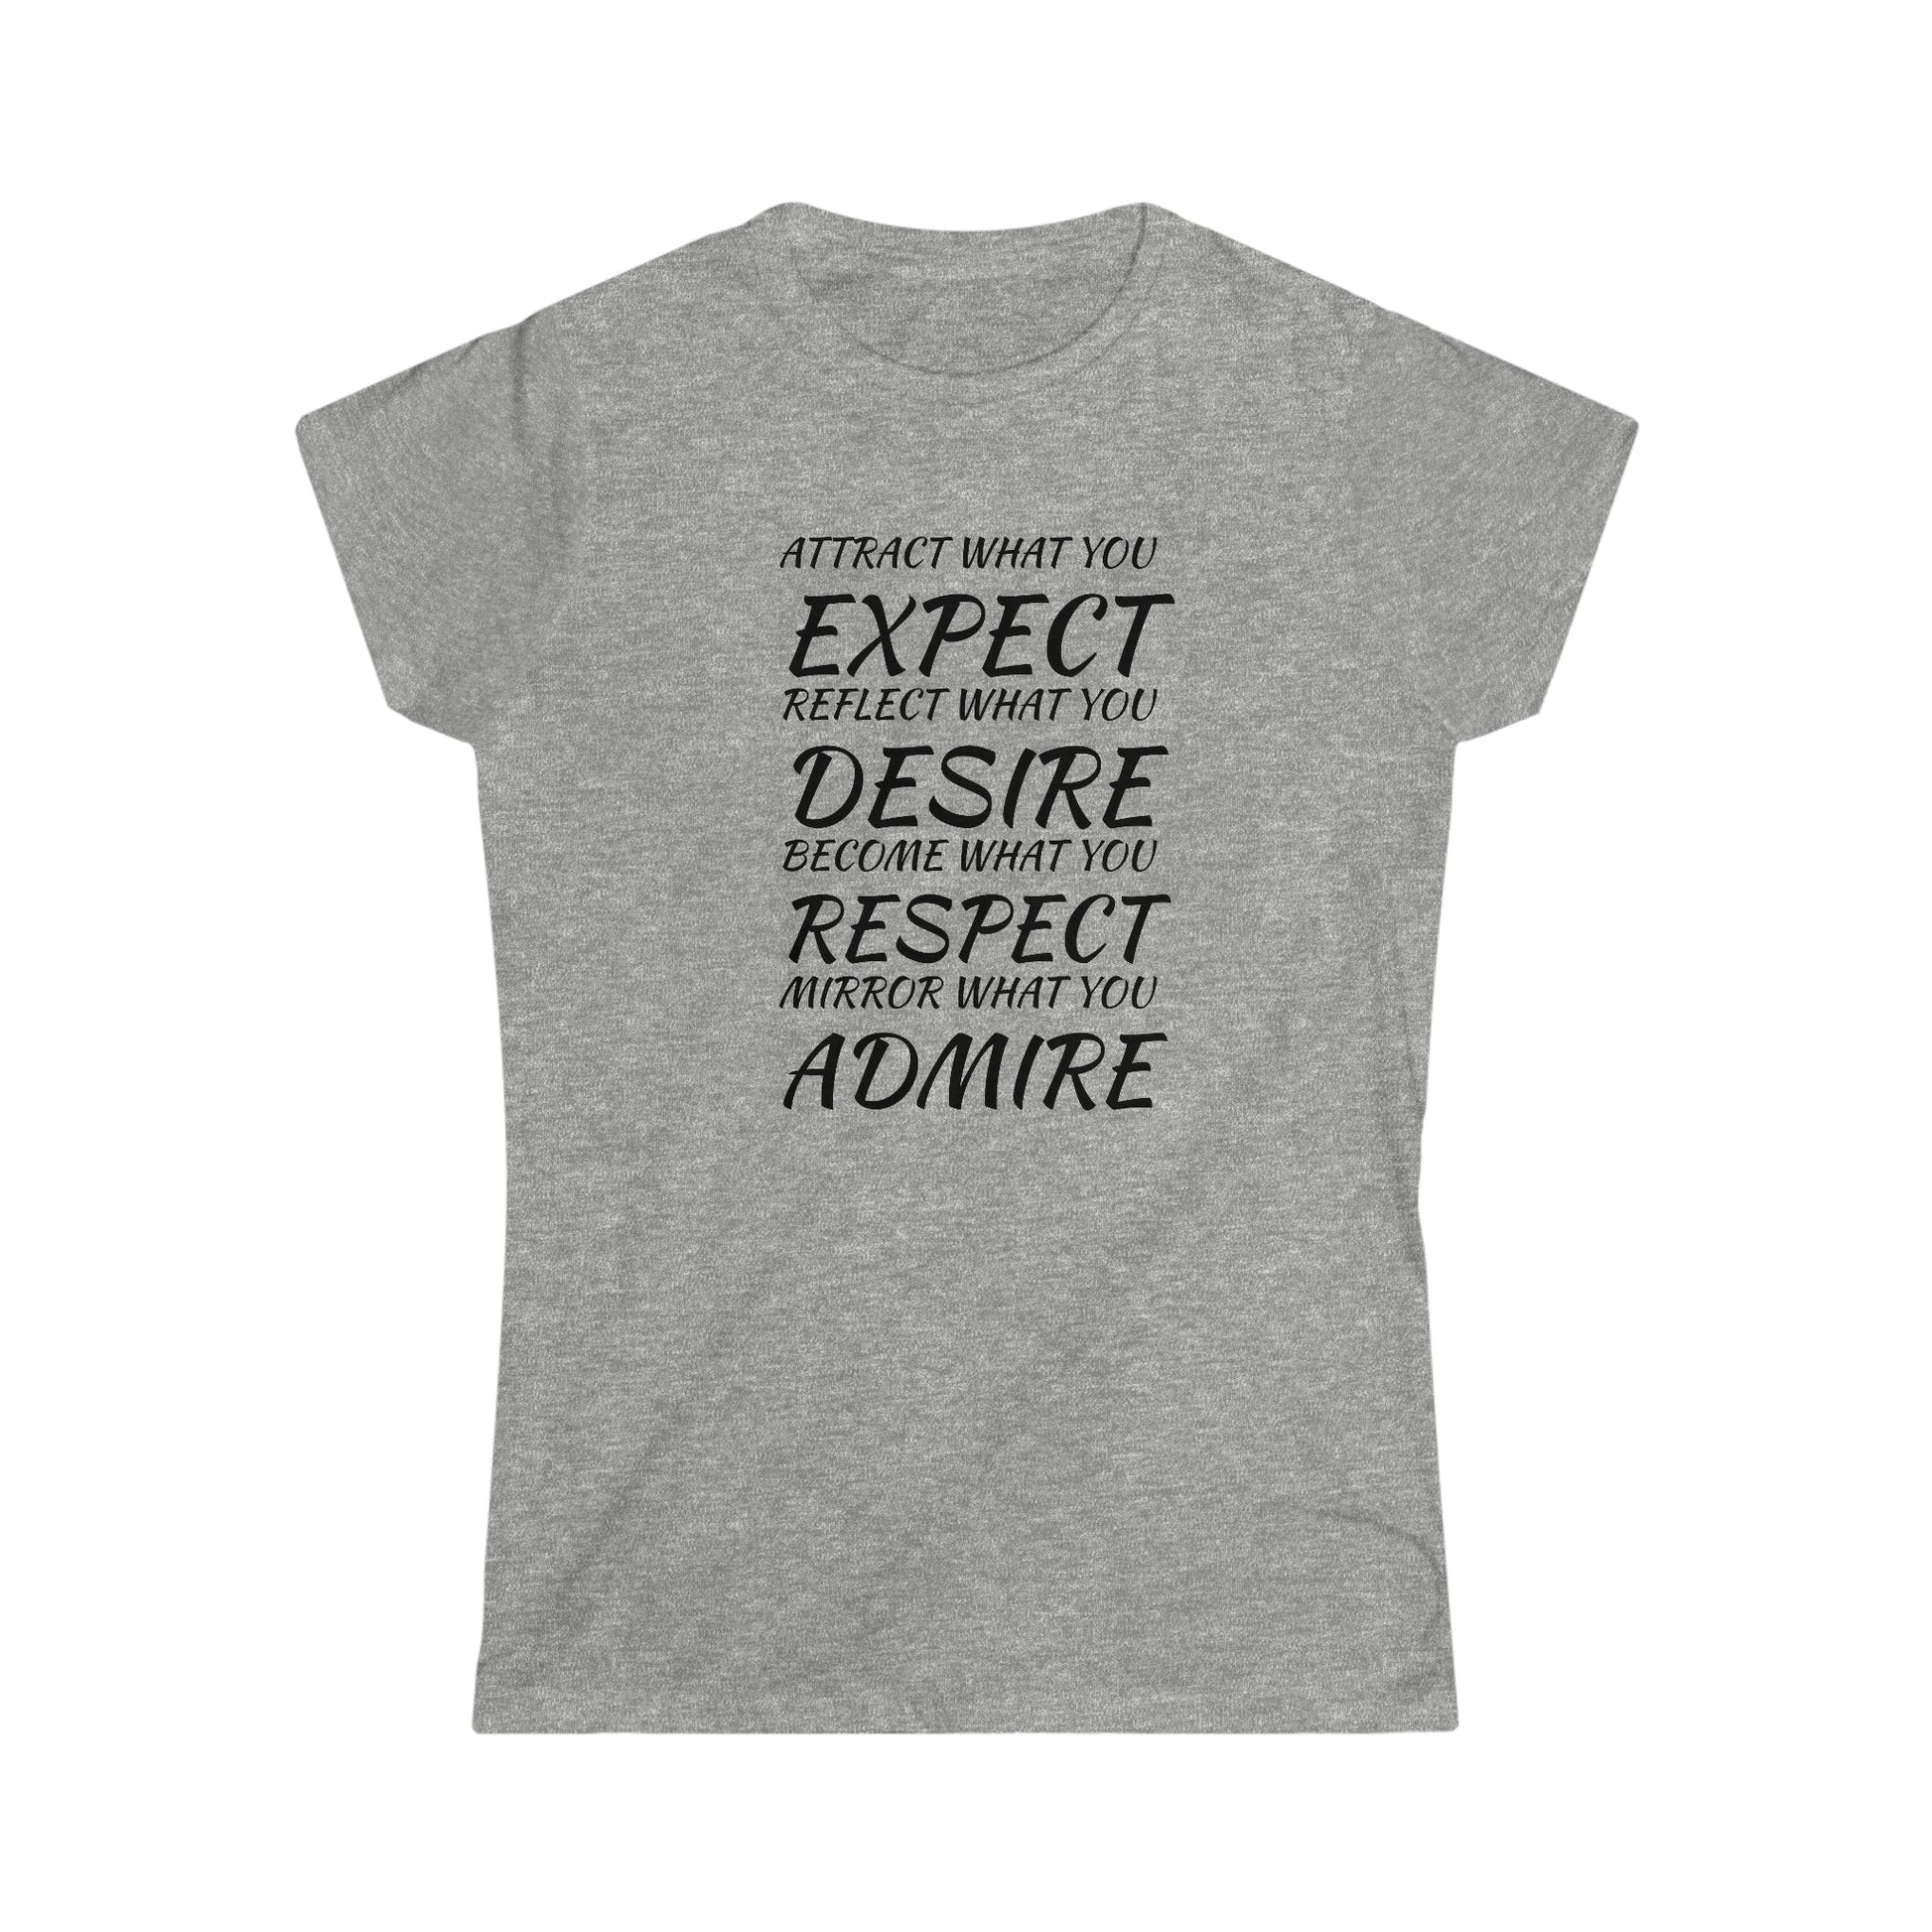 CrazyYetiClothing, CYC, Expect, Desire, Respect, Admire - Women's Softstyle Tee, T-Shirt